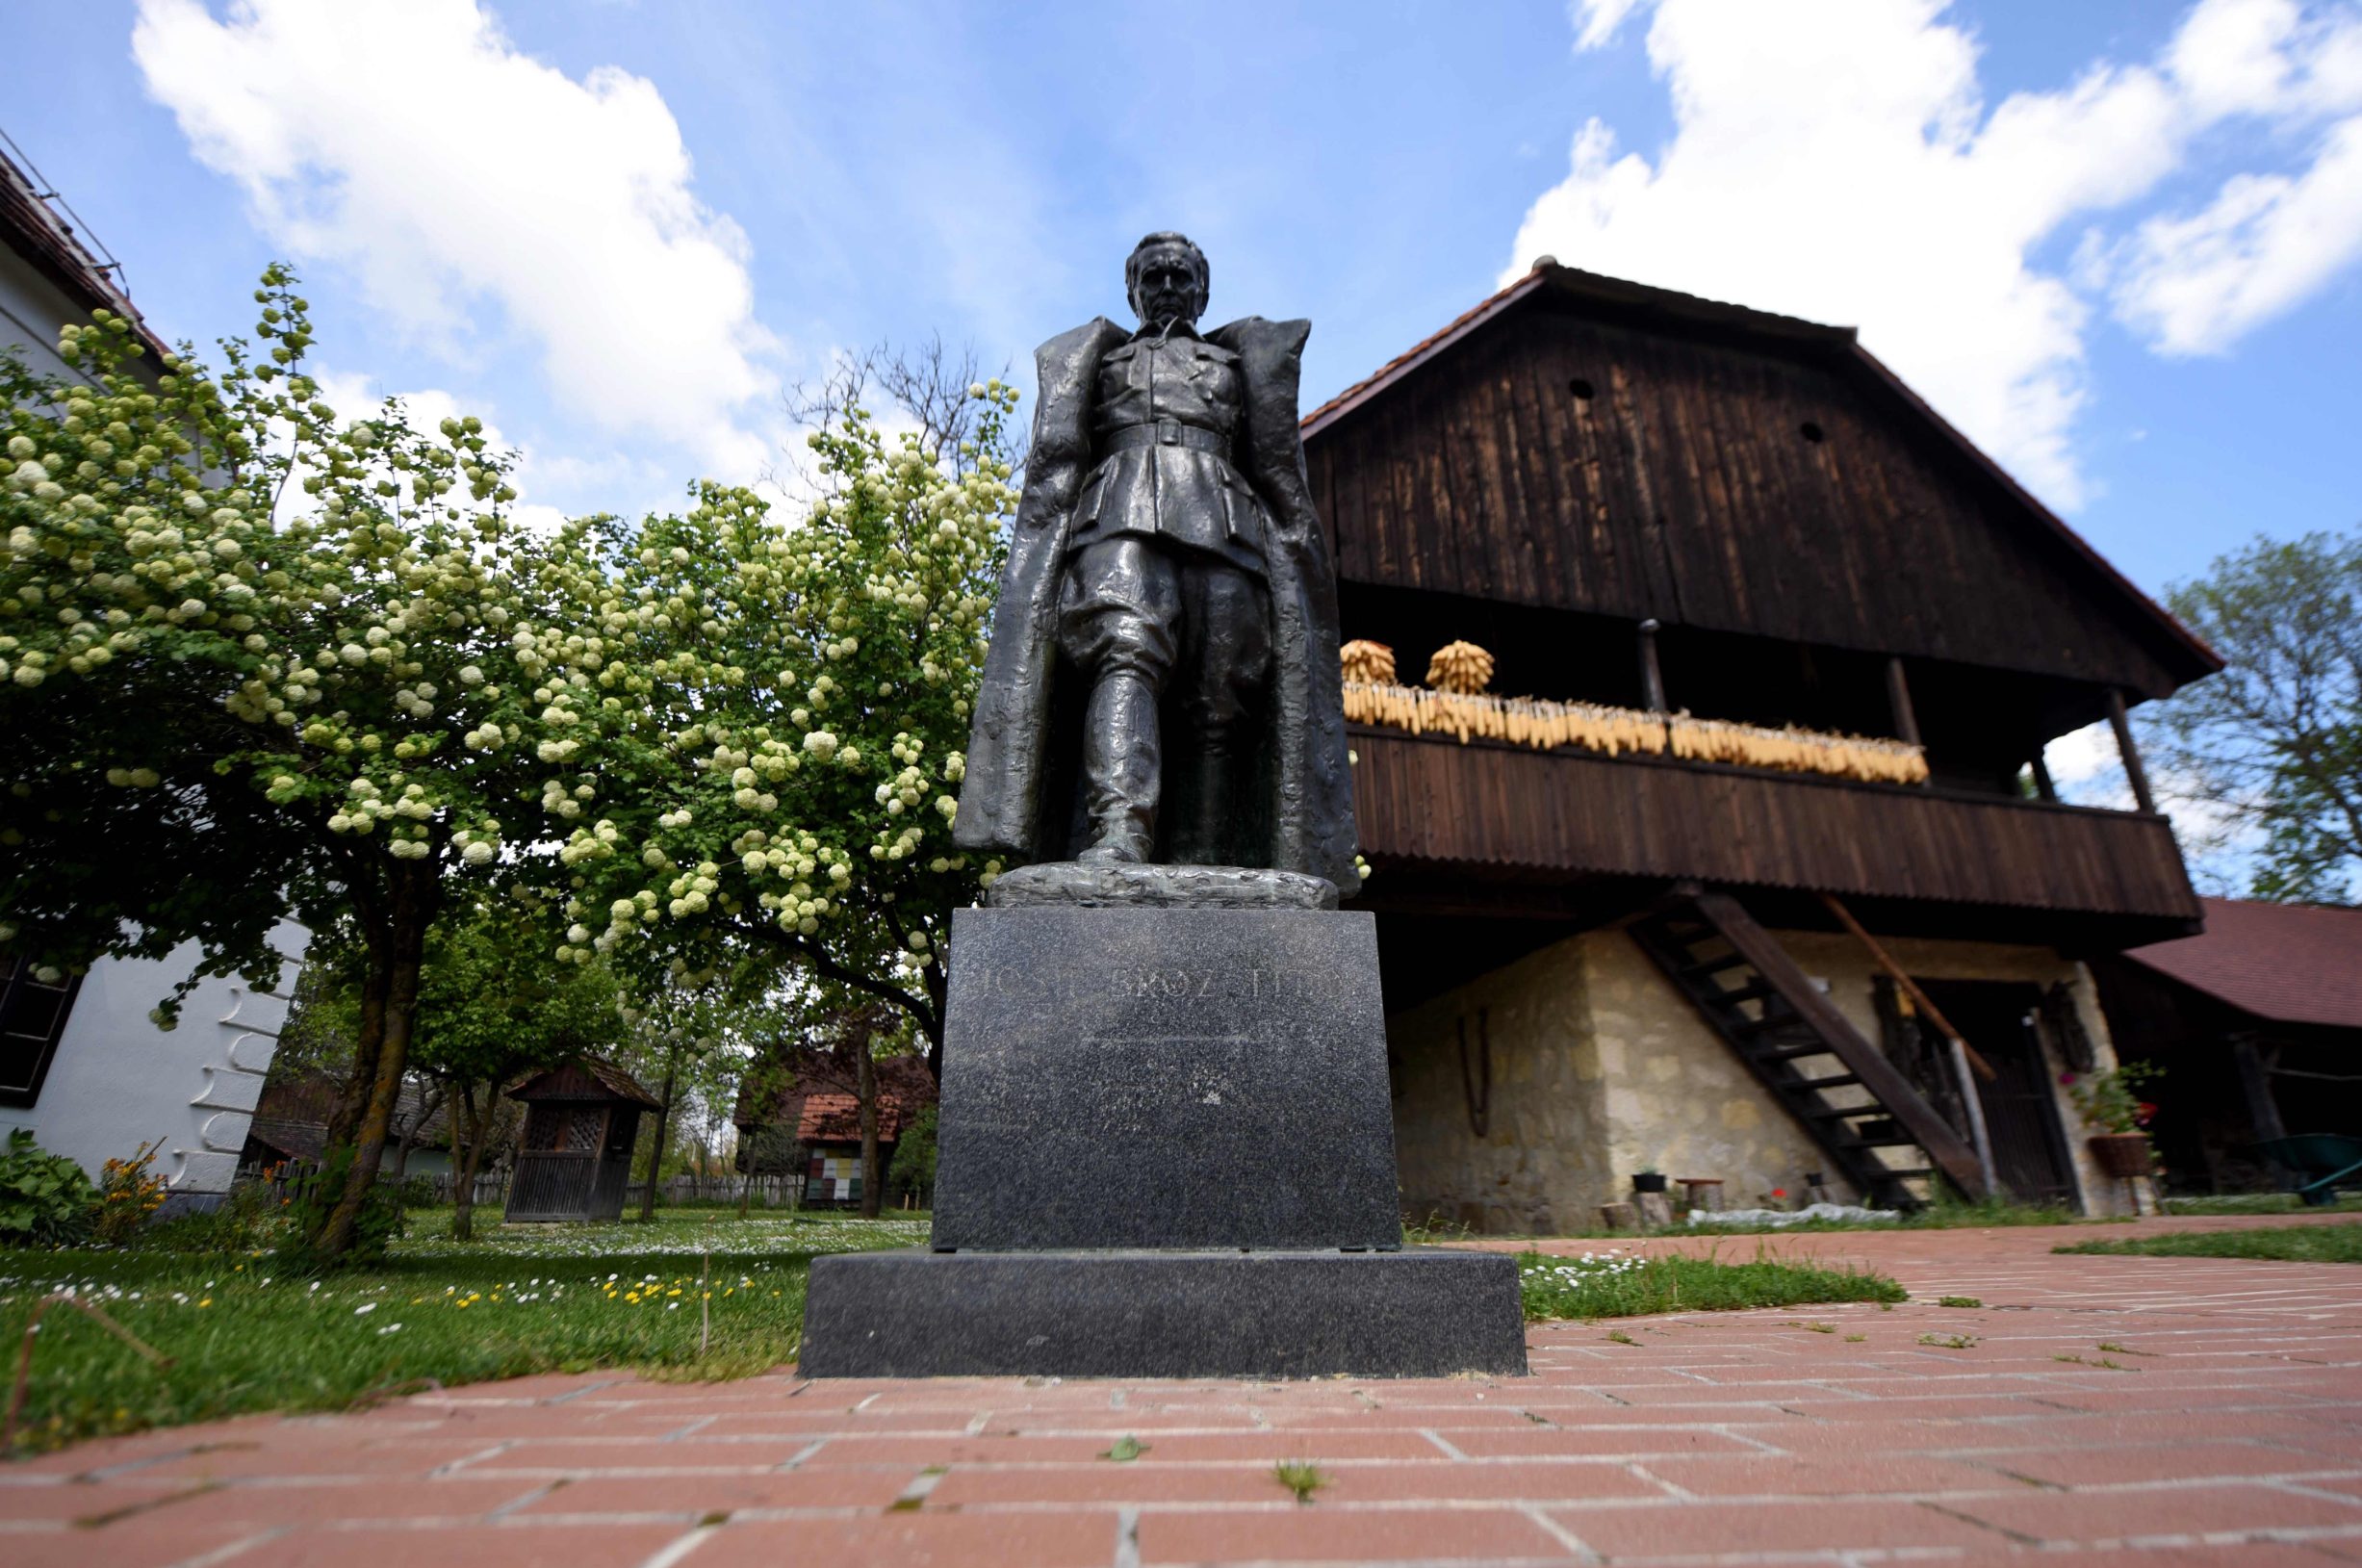 A picture taken on April 30, 2020 shows the statue by Croatian sculptor Antun Augustincic (19001979), of Josip Broz Tito (18921980), former President of communist Yugoslavia, next to the museum in Josip Broz Tito's birth house in the village of Kumrovec, some 50 km from Zagreb. - A benevolent unifier or a power-hungry dictator? On the 40th anniversary of his death, the late Yugoslav leader Josip Broz Tito's legacy is still a topic of debate. (Photo by Denis LOVROVIC / AFP)